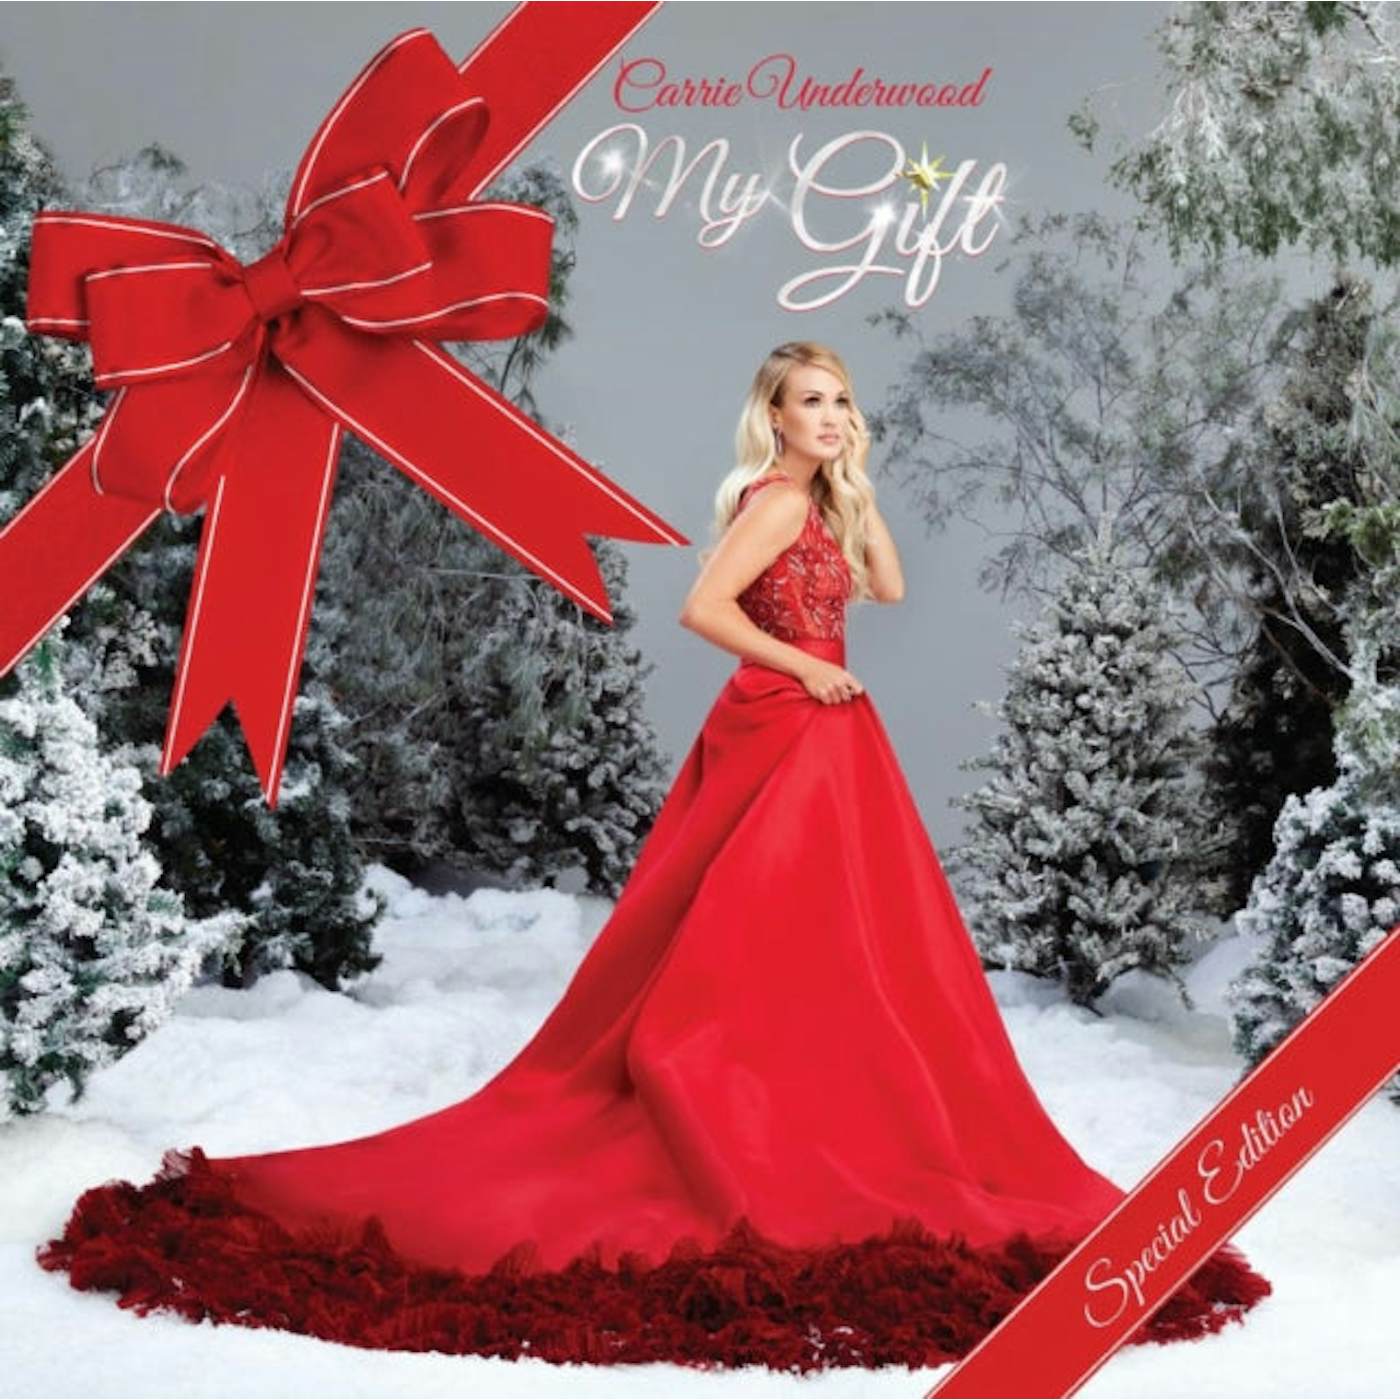 Carrie Underwood LP Vinyl Record - My Gift (Special Edition) (Crystal Clear Vinyl)